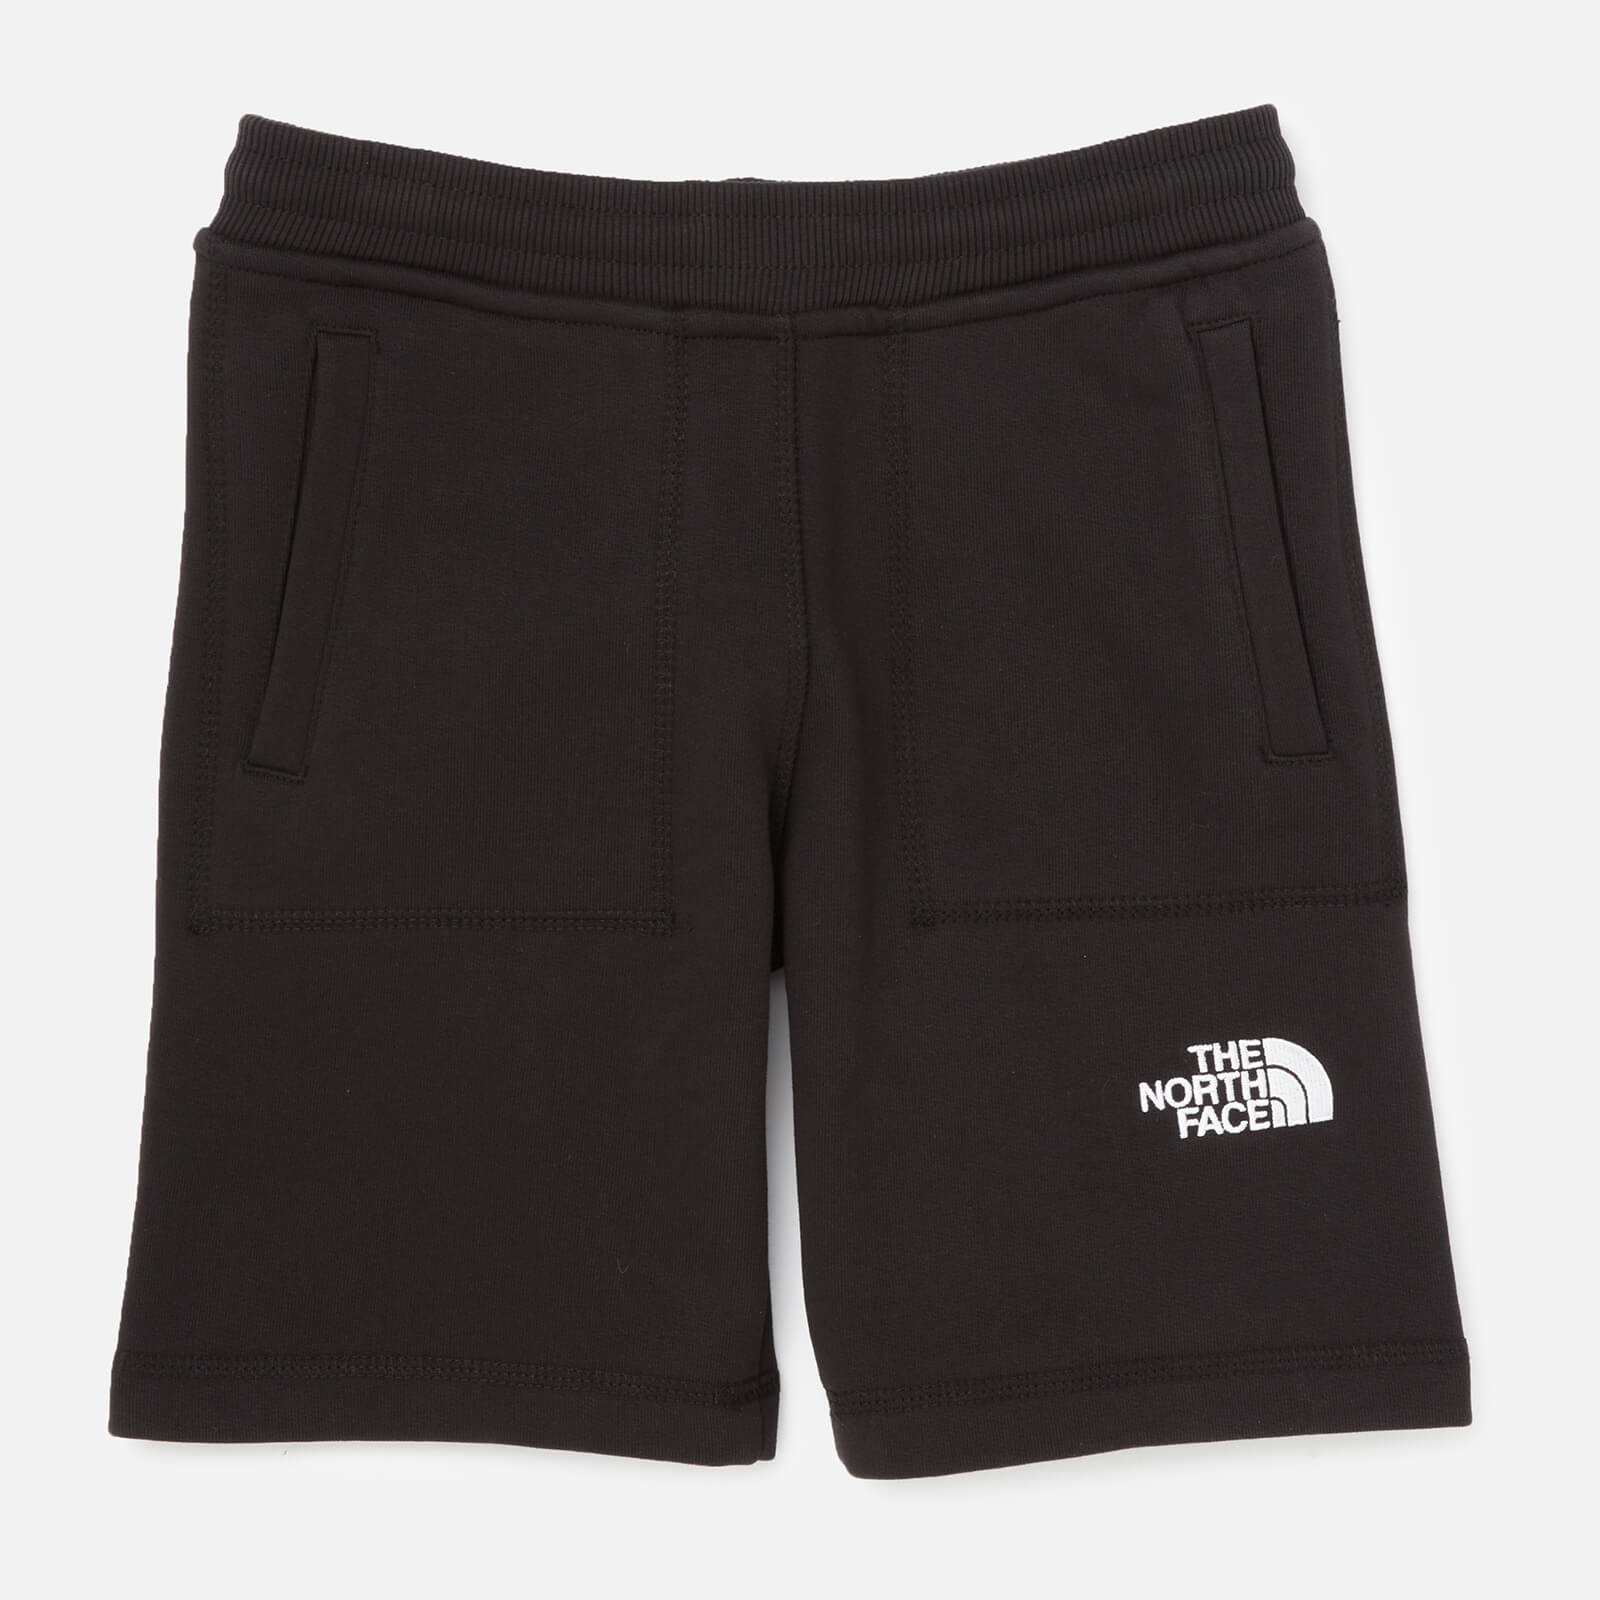 The North Face Boys' Youth Fleece Shorts - Black - 6 Years